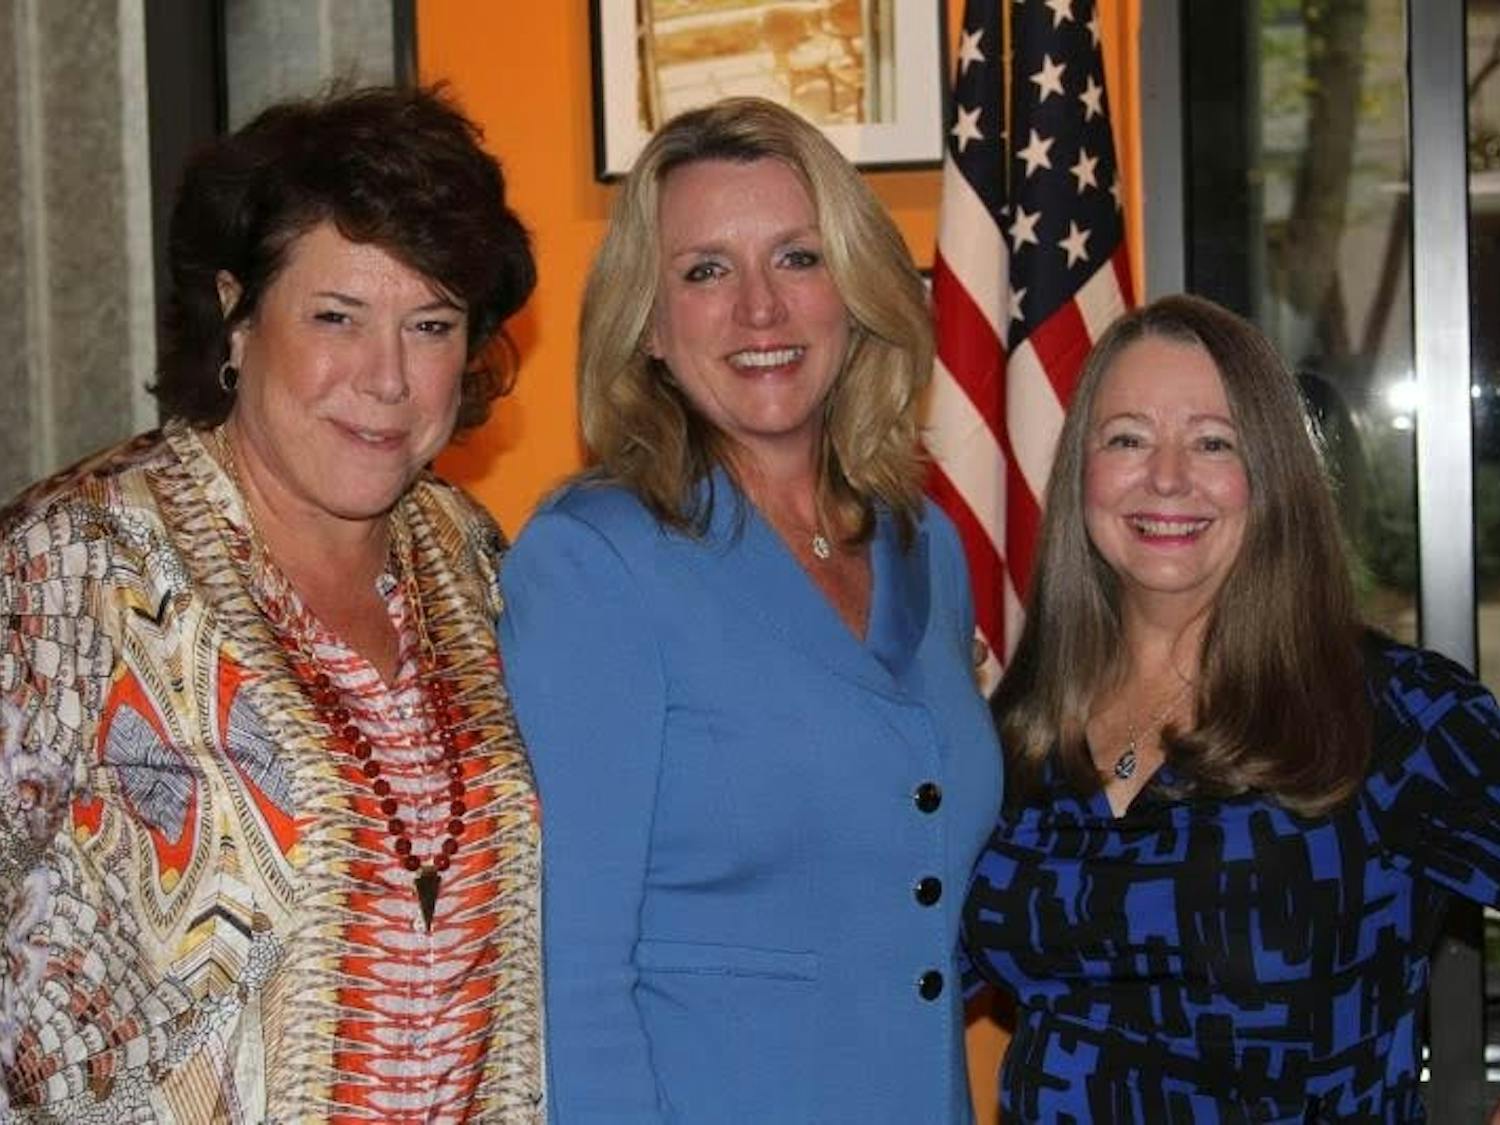 Deborah Lee James (middle) is one of the highest ranking Duke alums in government as secretary of the Air Force. She gave an address during a luncheon hosted by Duke Campus Club Monday.